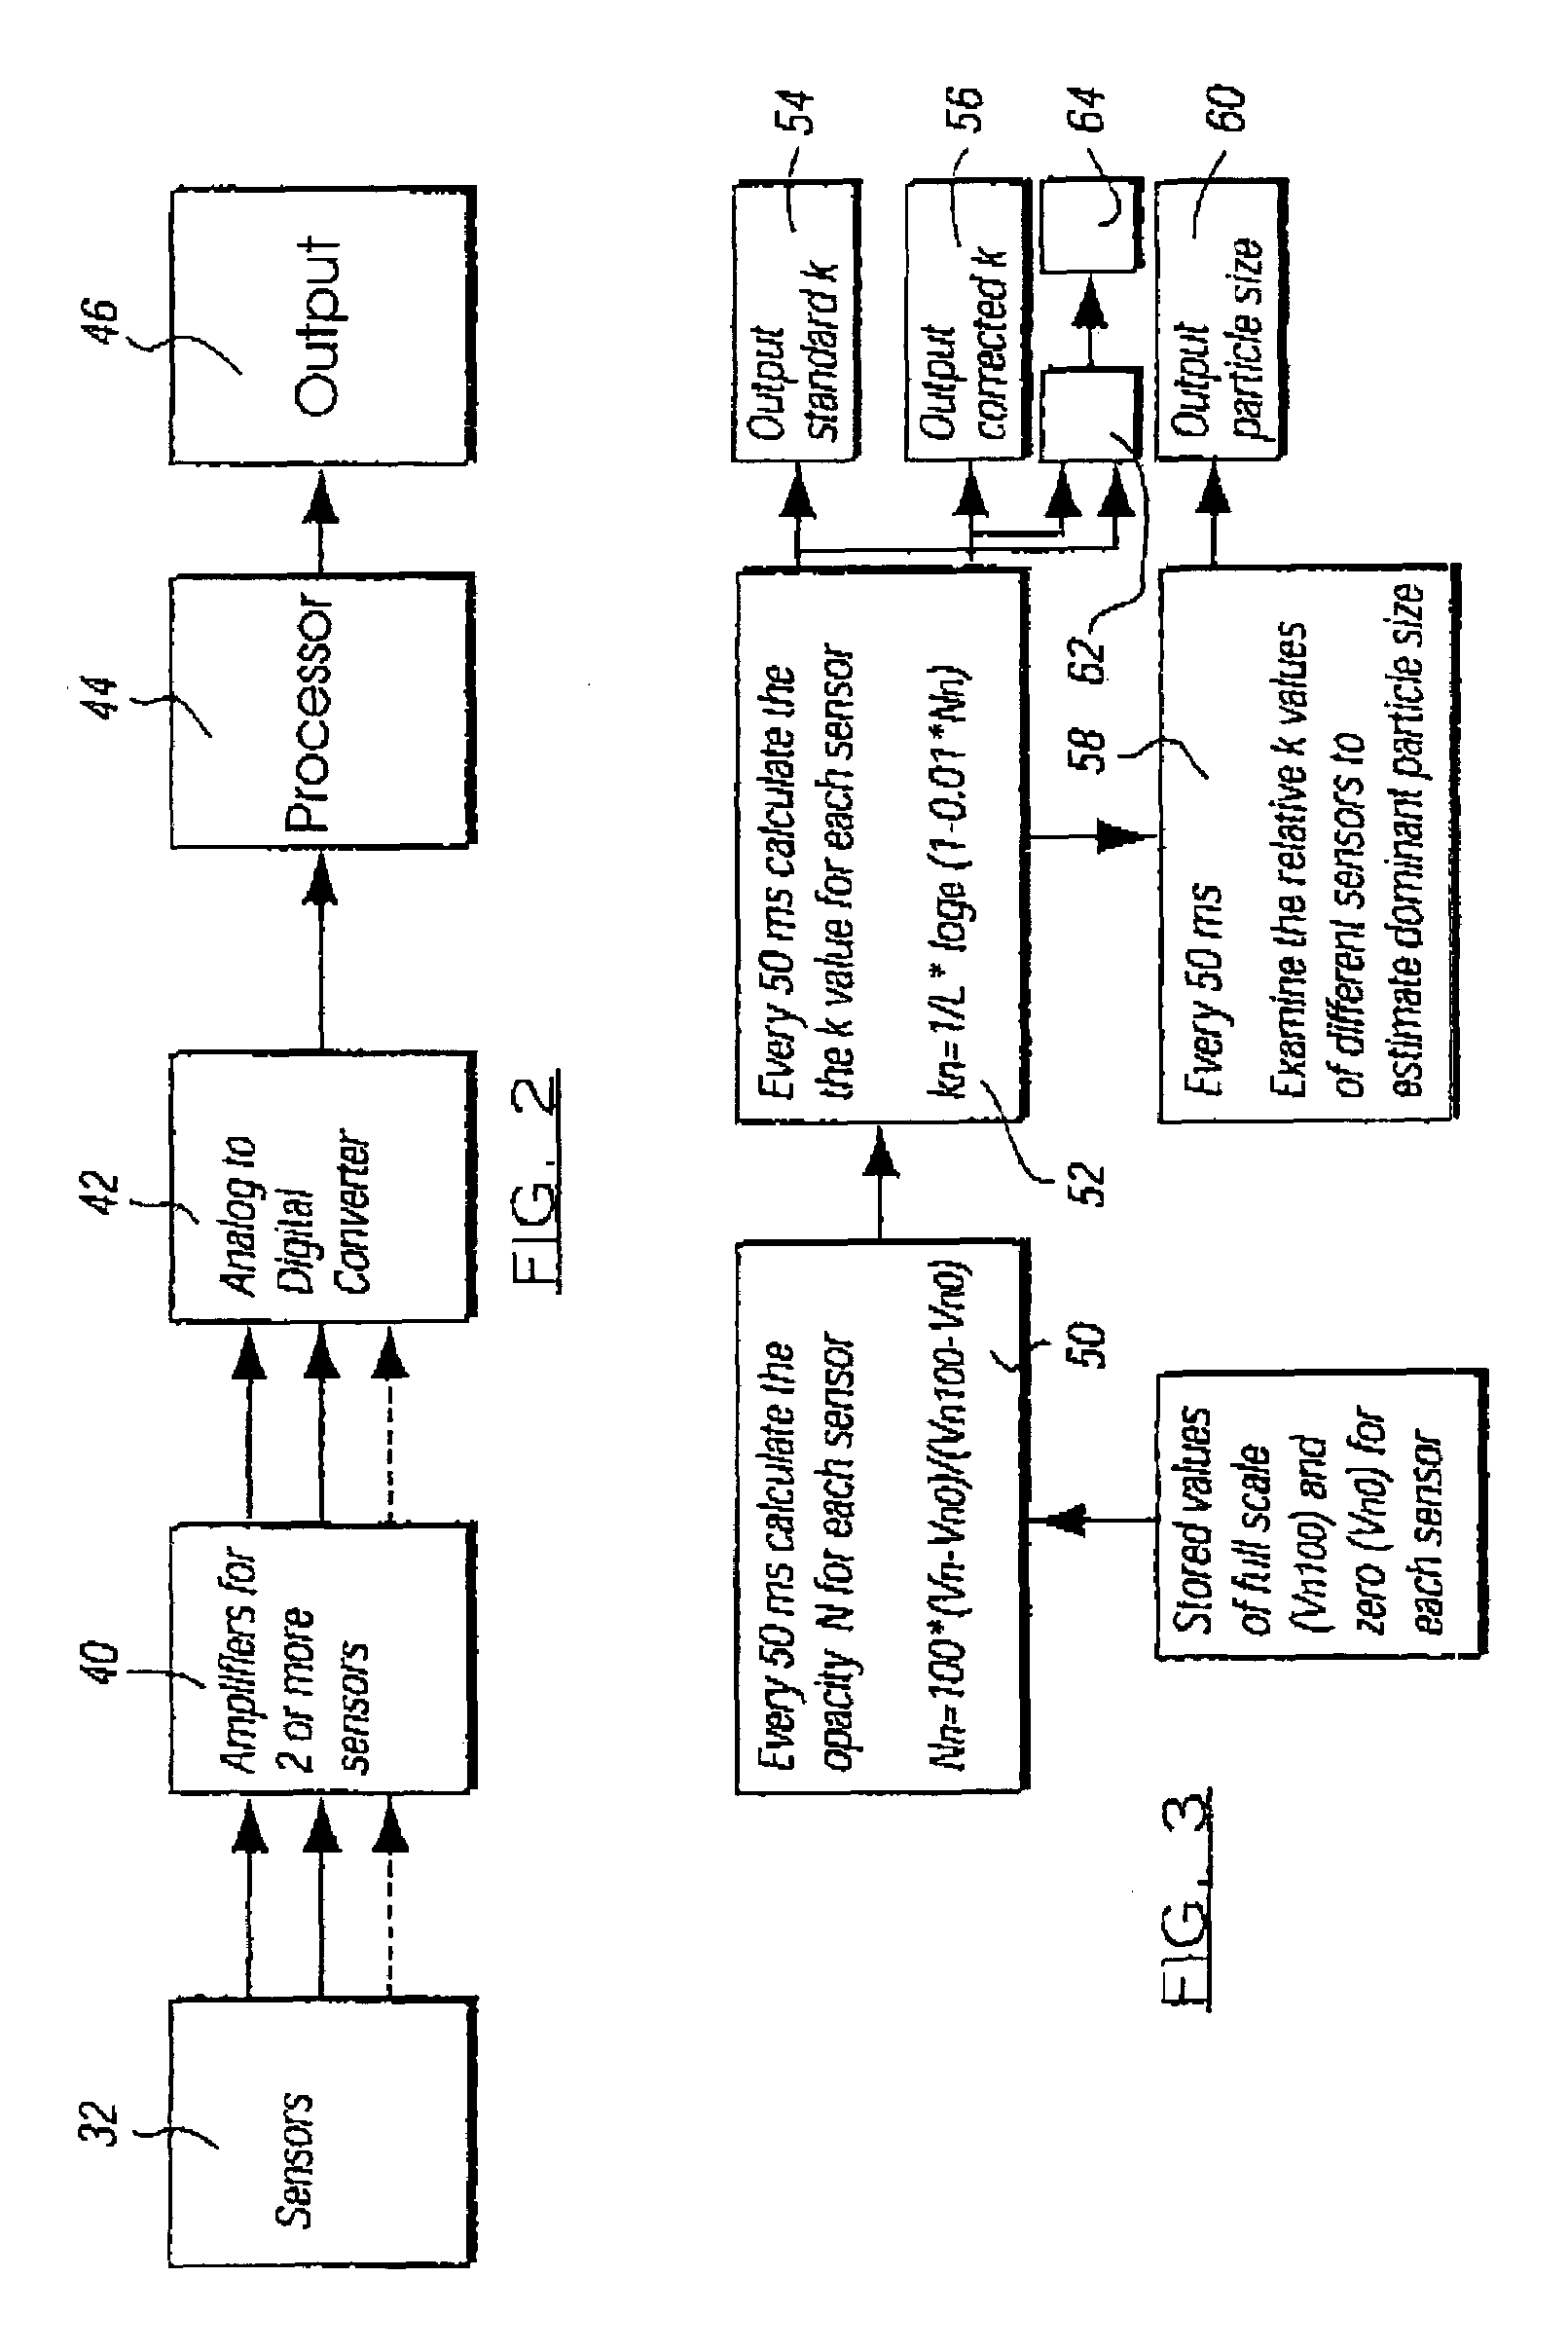 Apparatus for monitoring engine exhaust